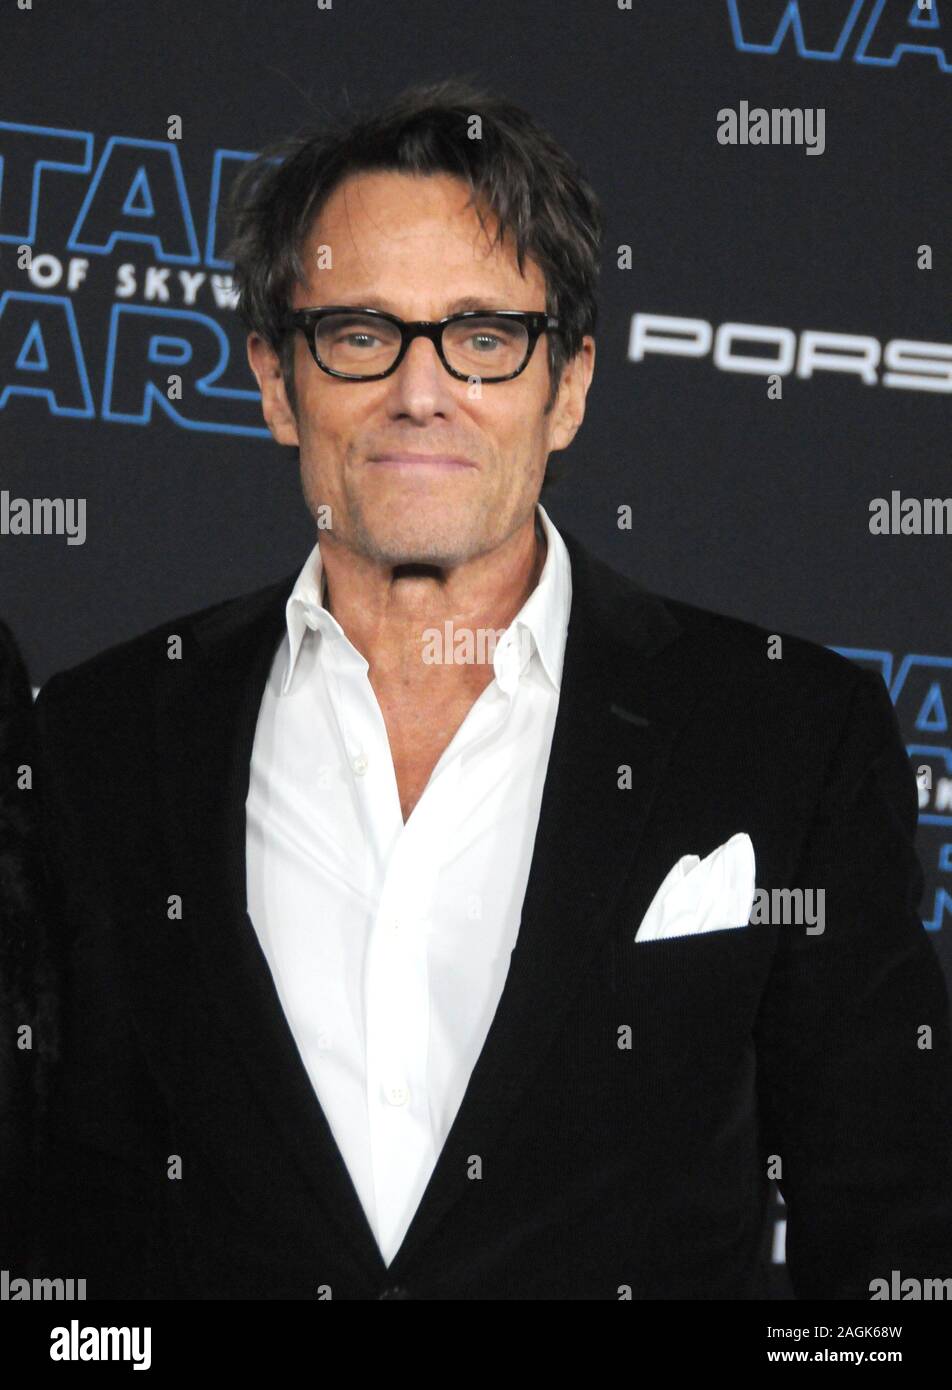 Hollywood, California, USA 16th December 2019 Costume designer Michael  Kaplan attends Lucasfilm's World Premiere of 'Star Wars: The Rise of  Skywalker' on December 16, 2019 in Hollywood, California, USA. Photo by  Barry